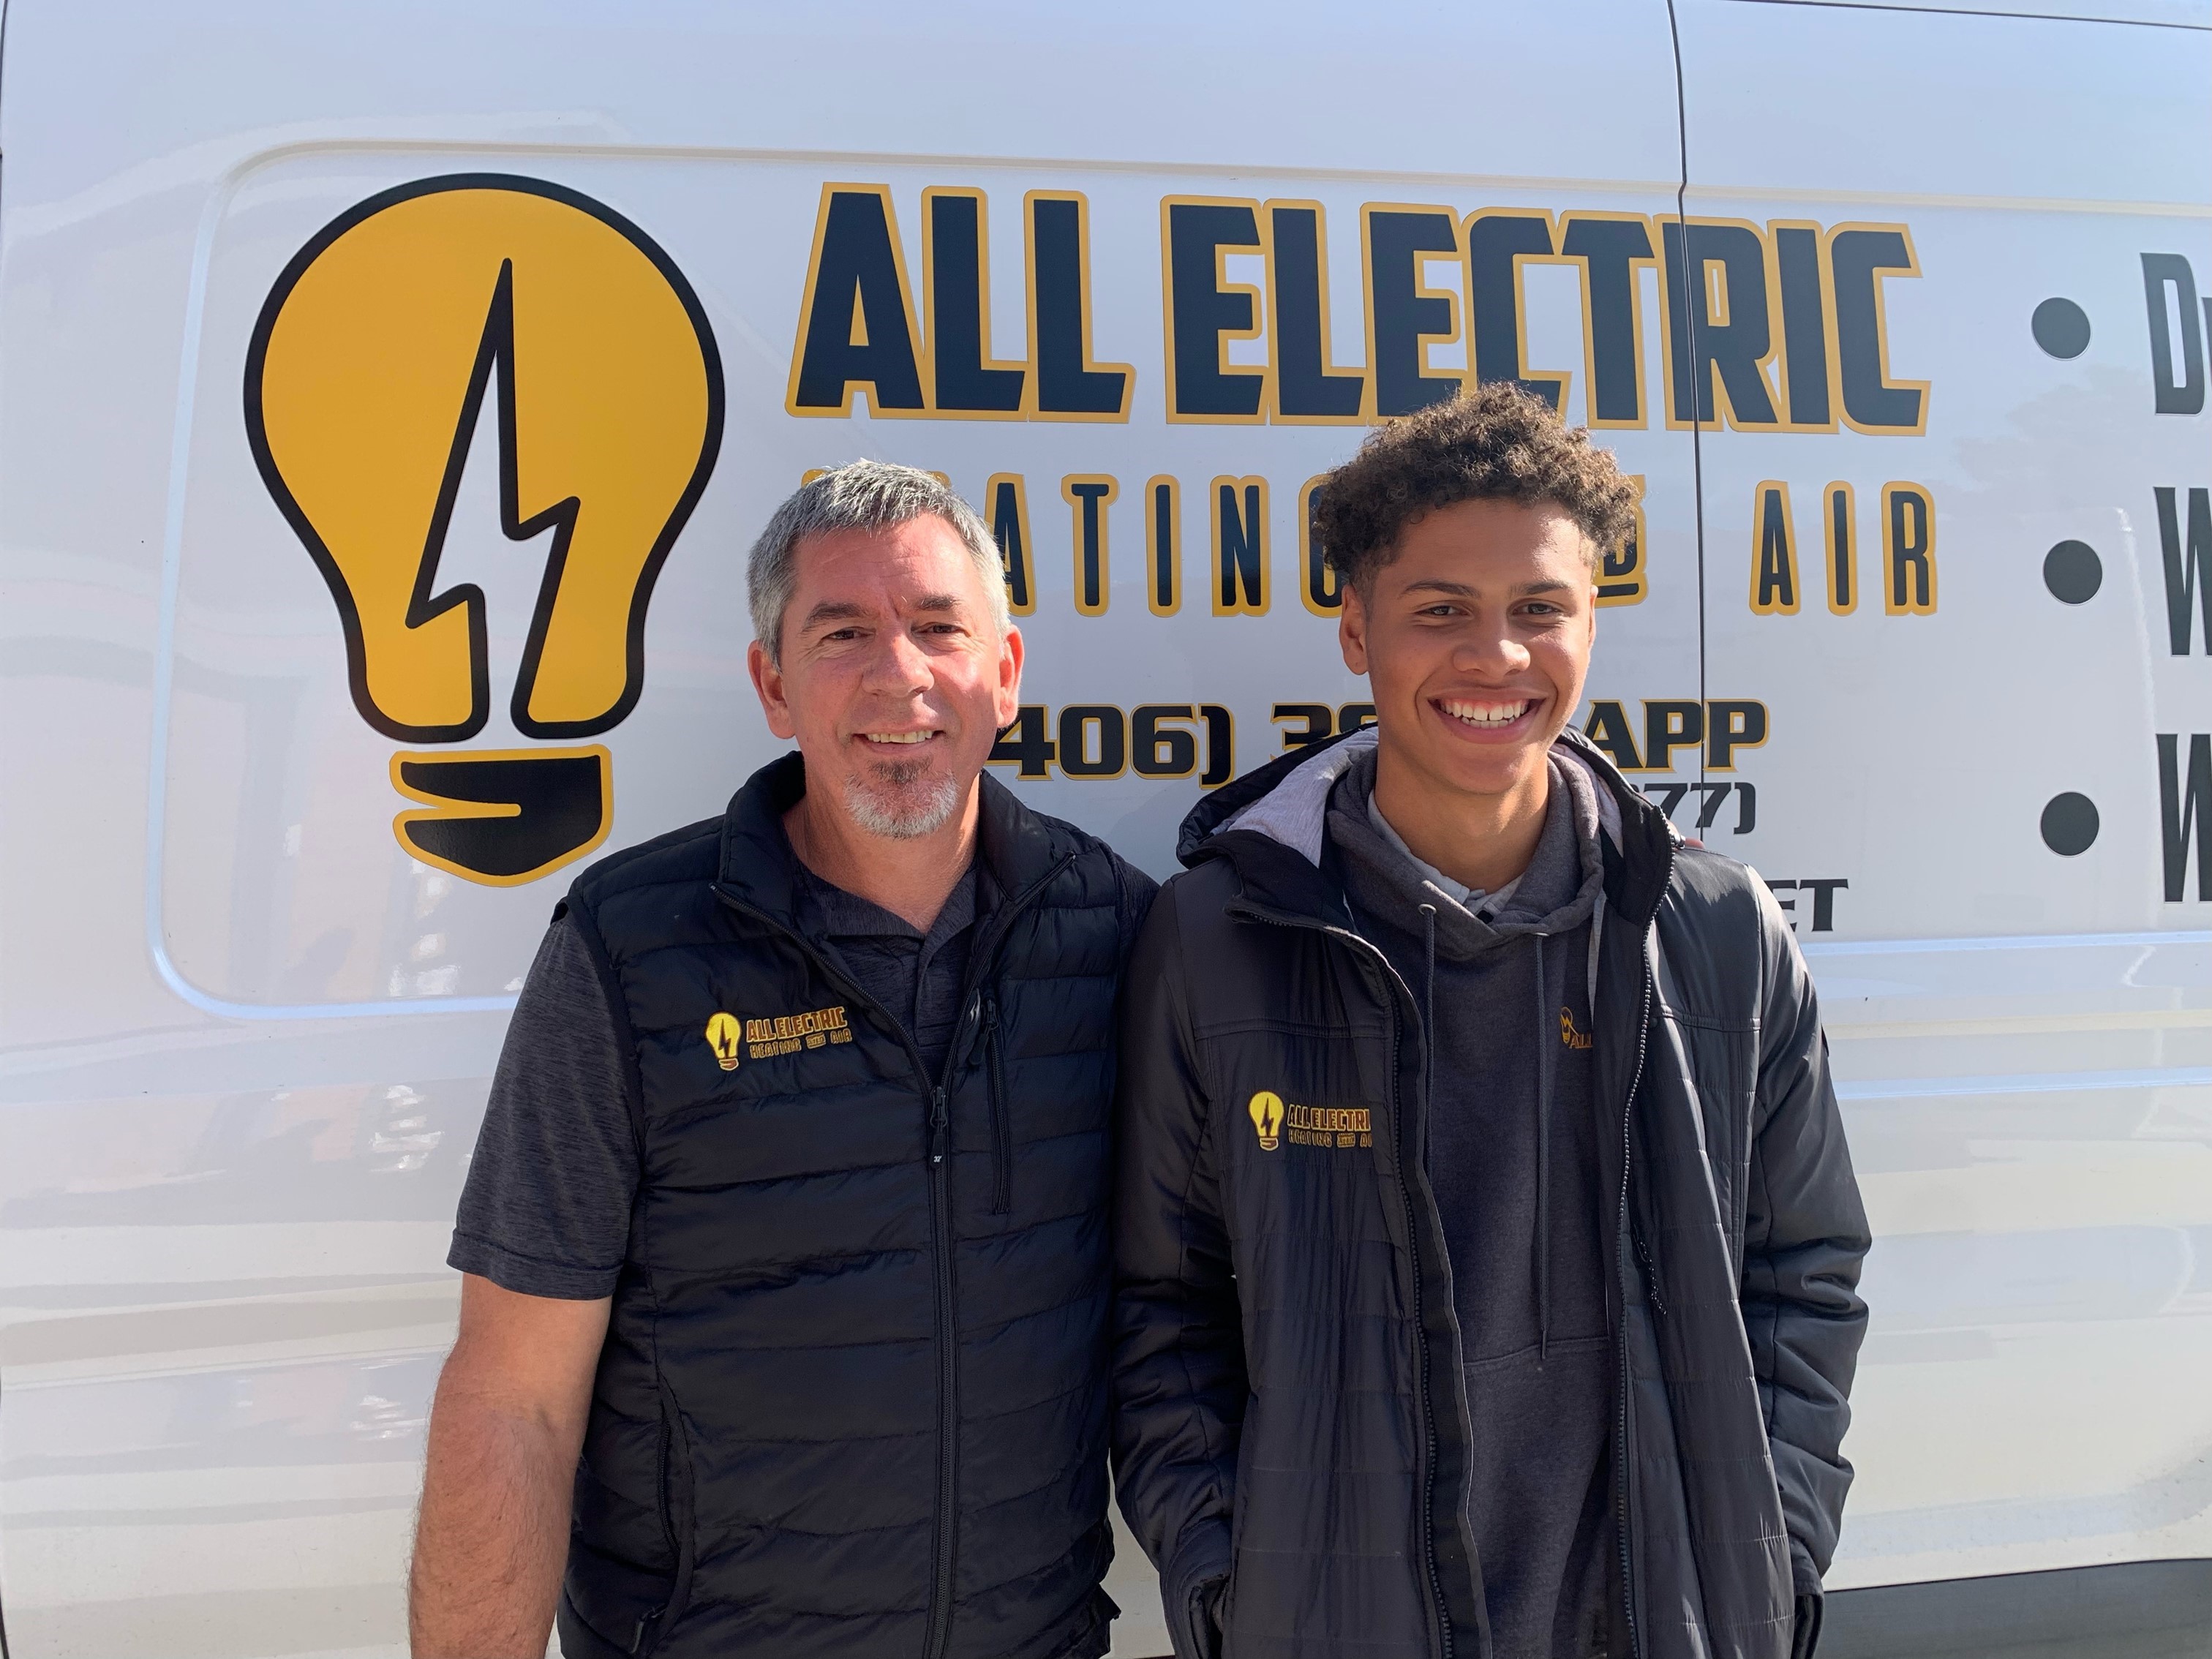 Aaron Luper of All Electric, LLC (left) pictured with electrical apprentice Tray Lichtenberg (right)